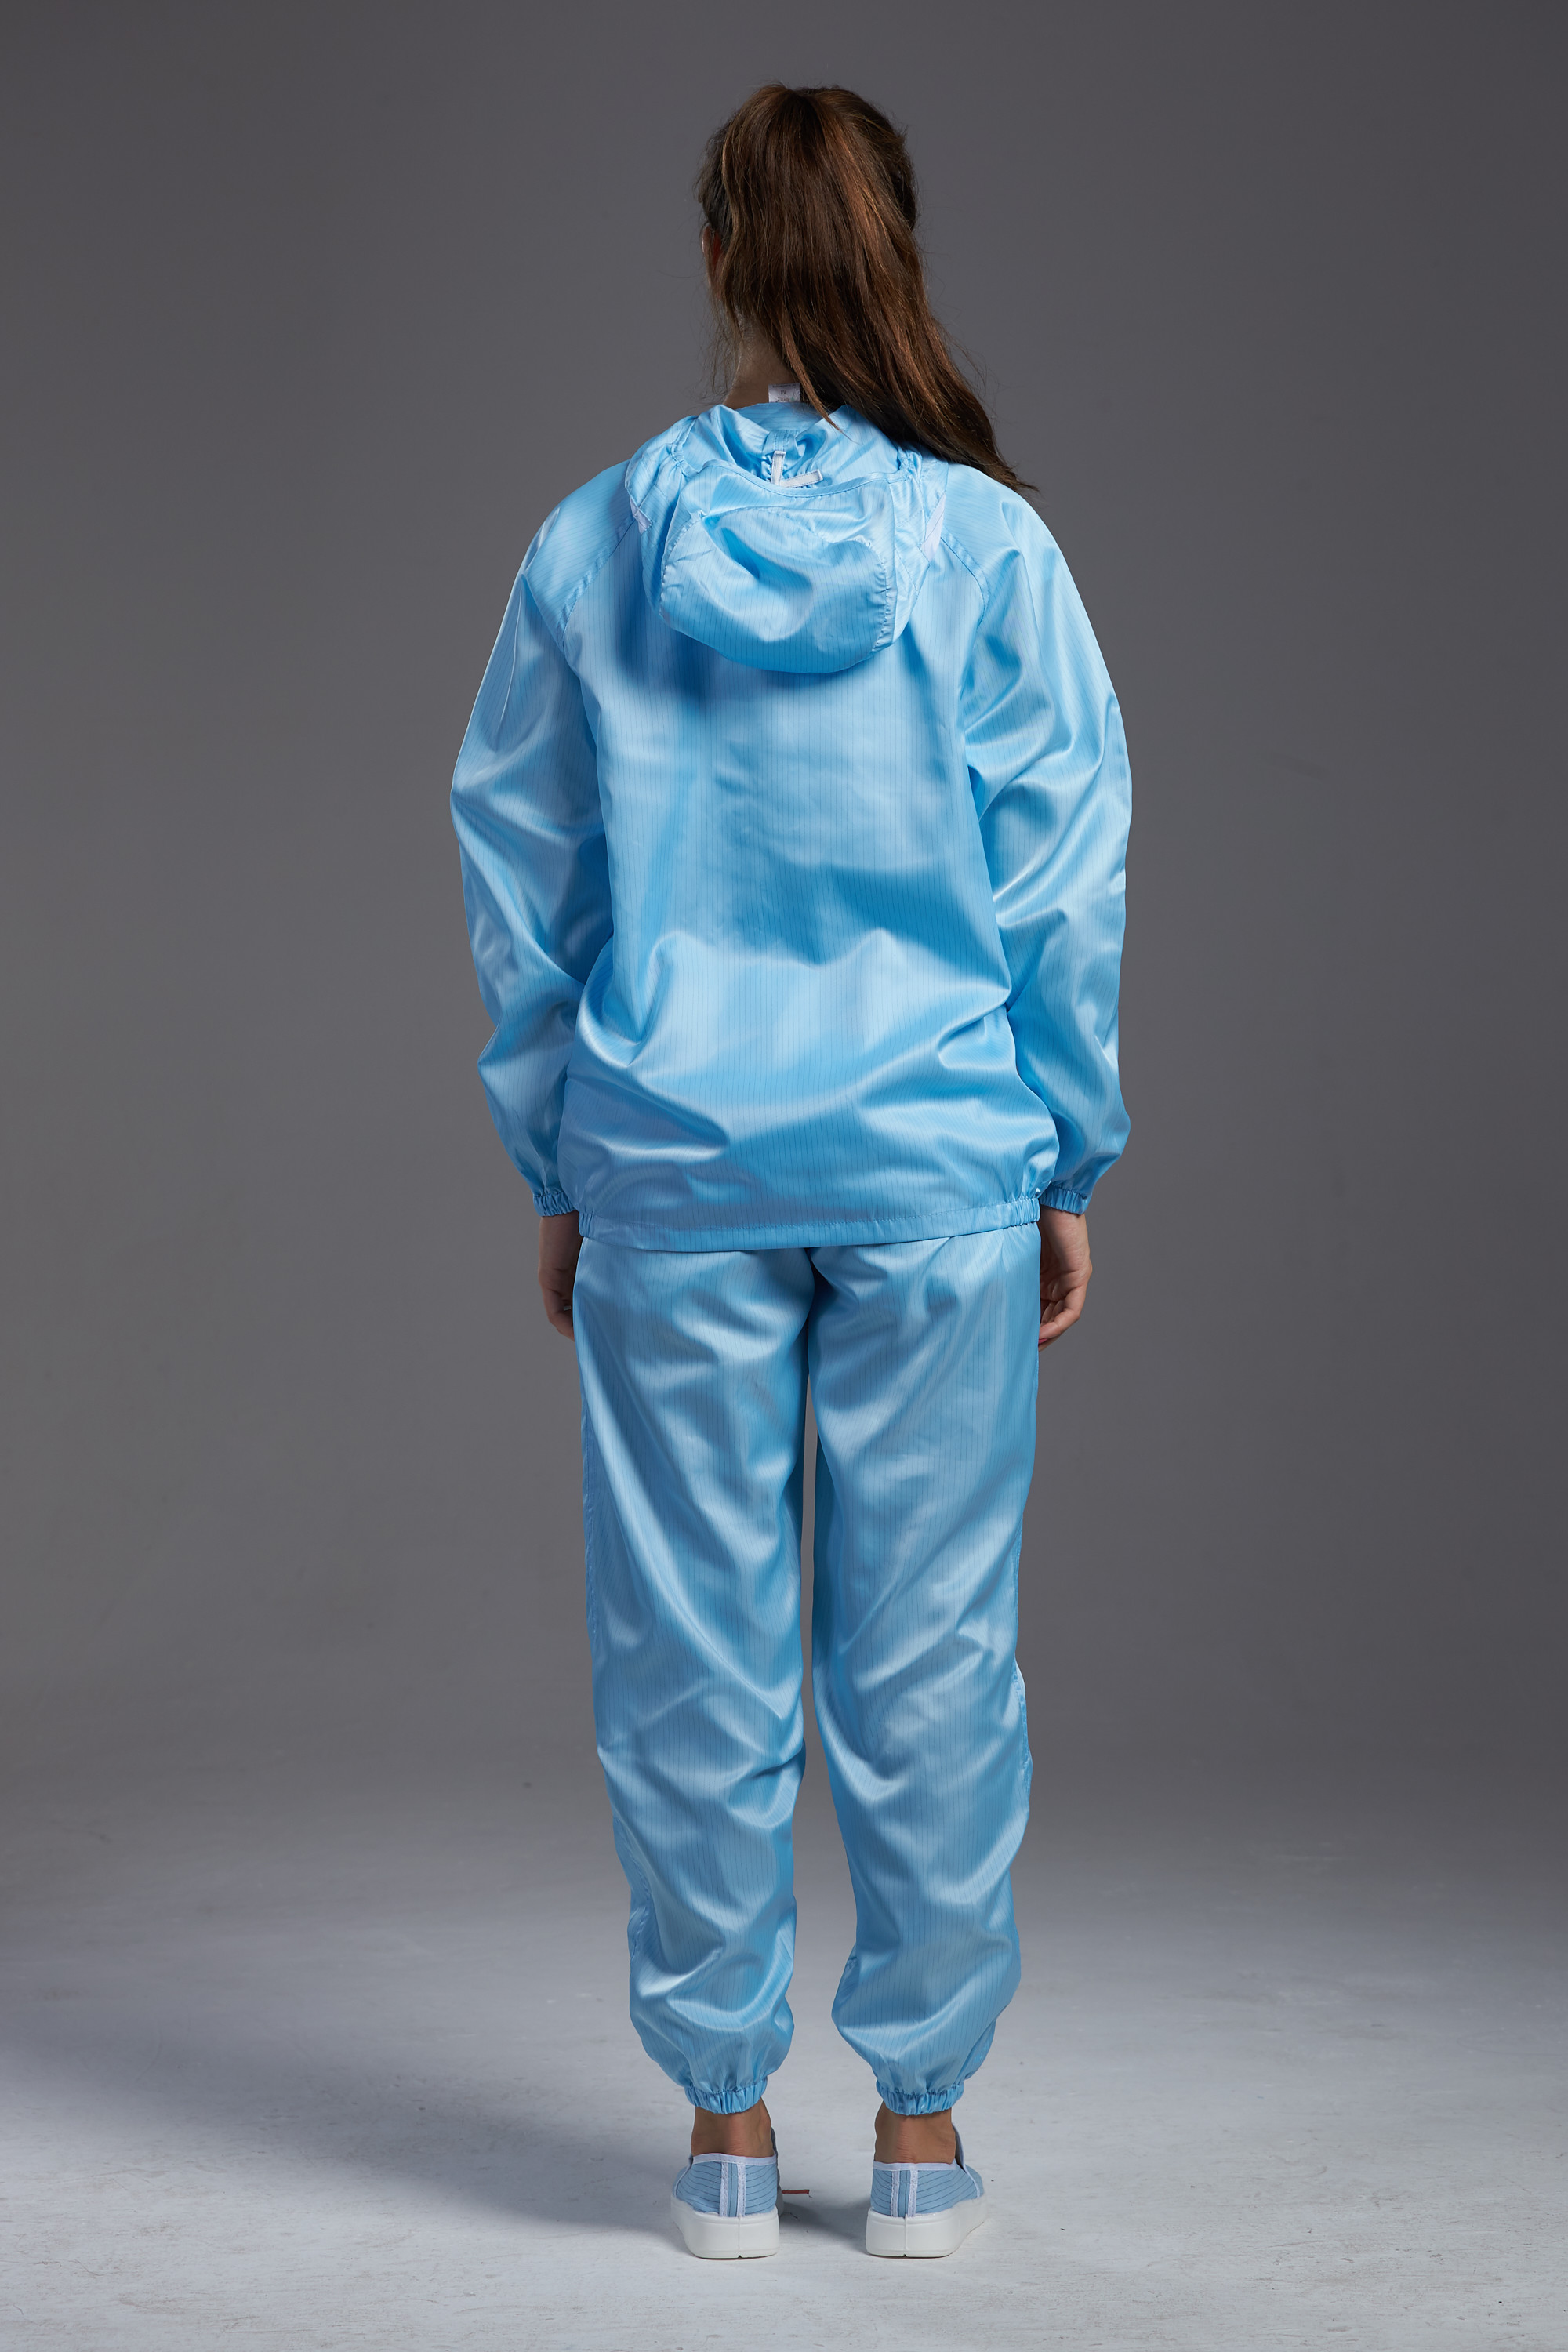 blue-color-antistatic-esd-cleanroom-jacket-and-pants-workwear-with-hood